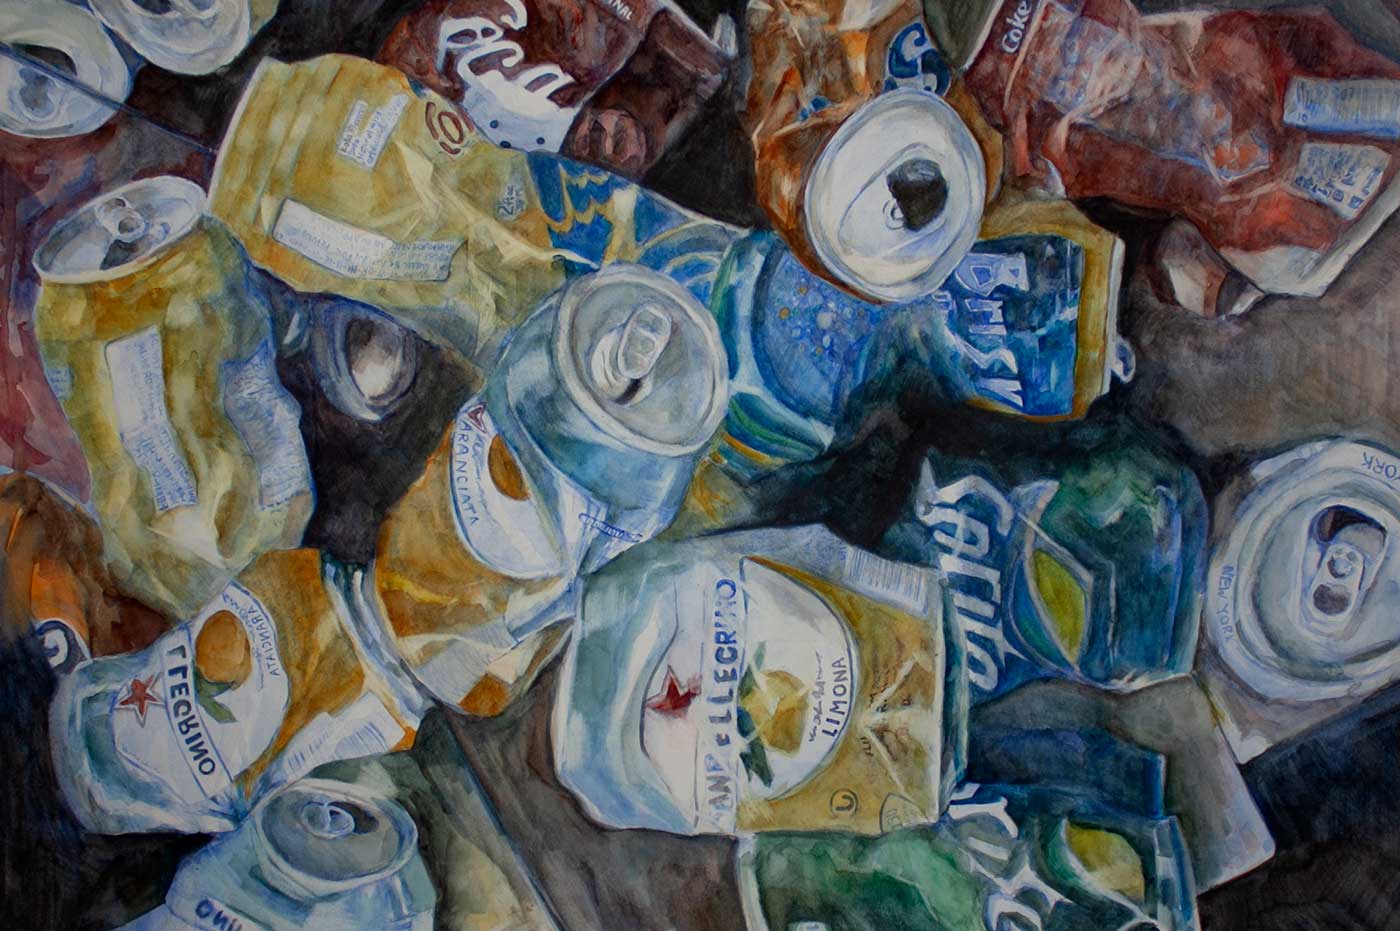 watercolor painting of crushed cans.